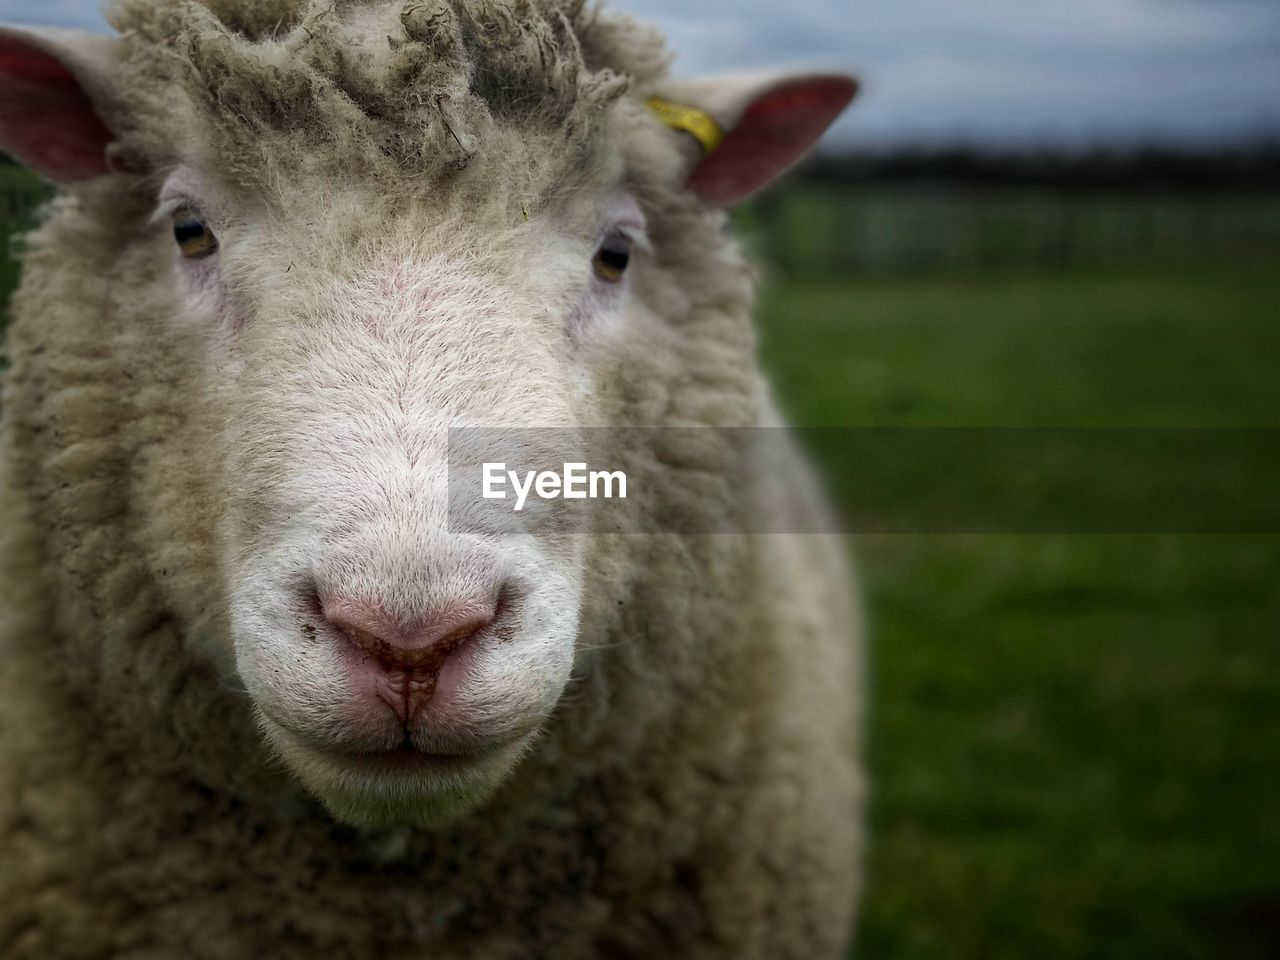 mammal, animal themes, animal, livestock, domestic animals, sheep, portrait, one animal, pet, pasture, looking at camera, agriculture, close-up, animal body part, no people, grass, focus on foreground, nature, animal head, plant, rural scene, wool, farm, landscape, day, field, outdoors, front view, land